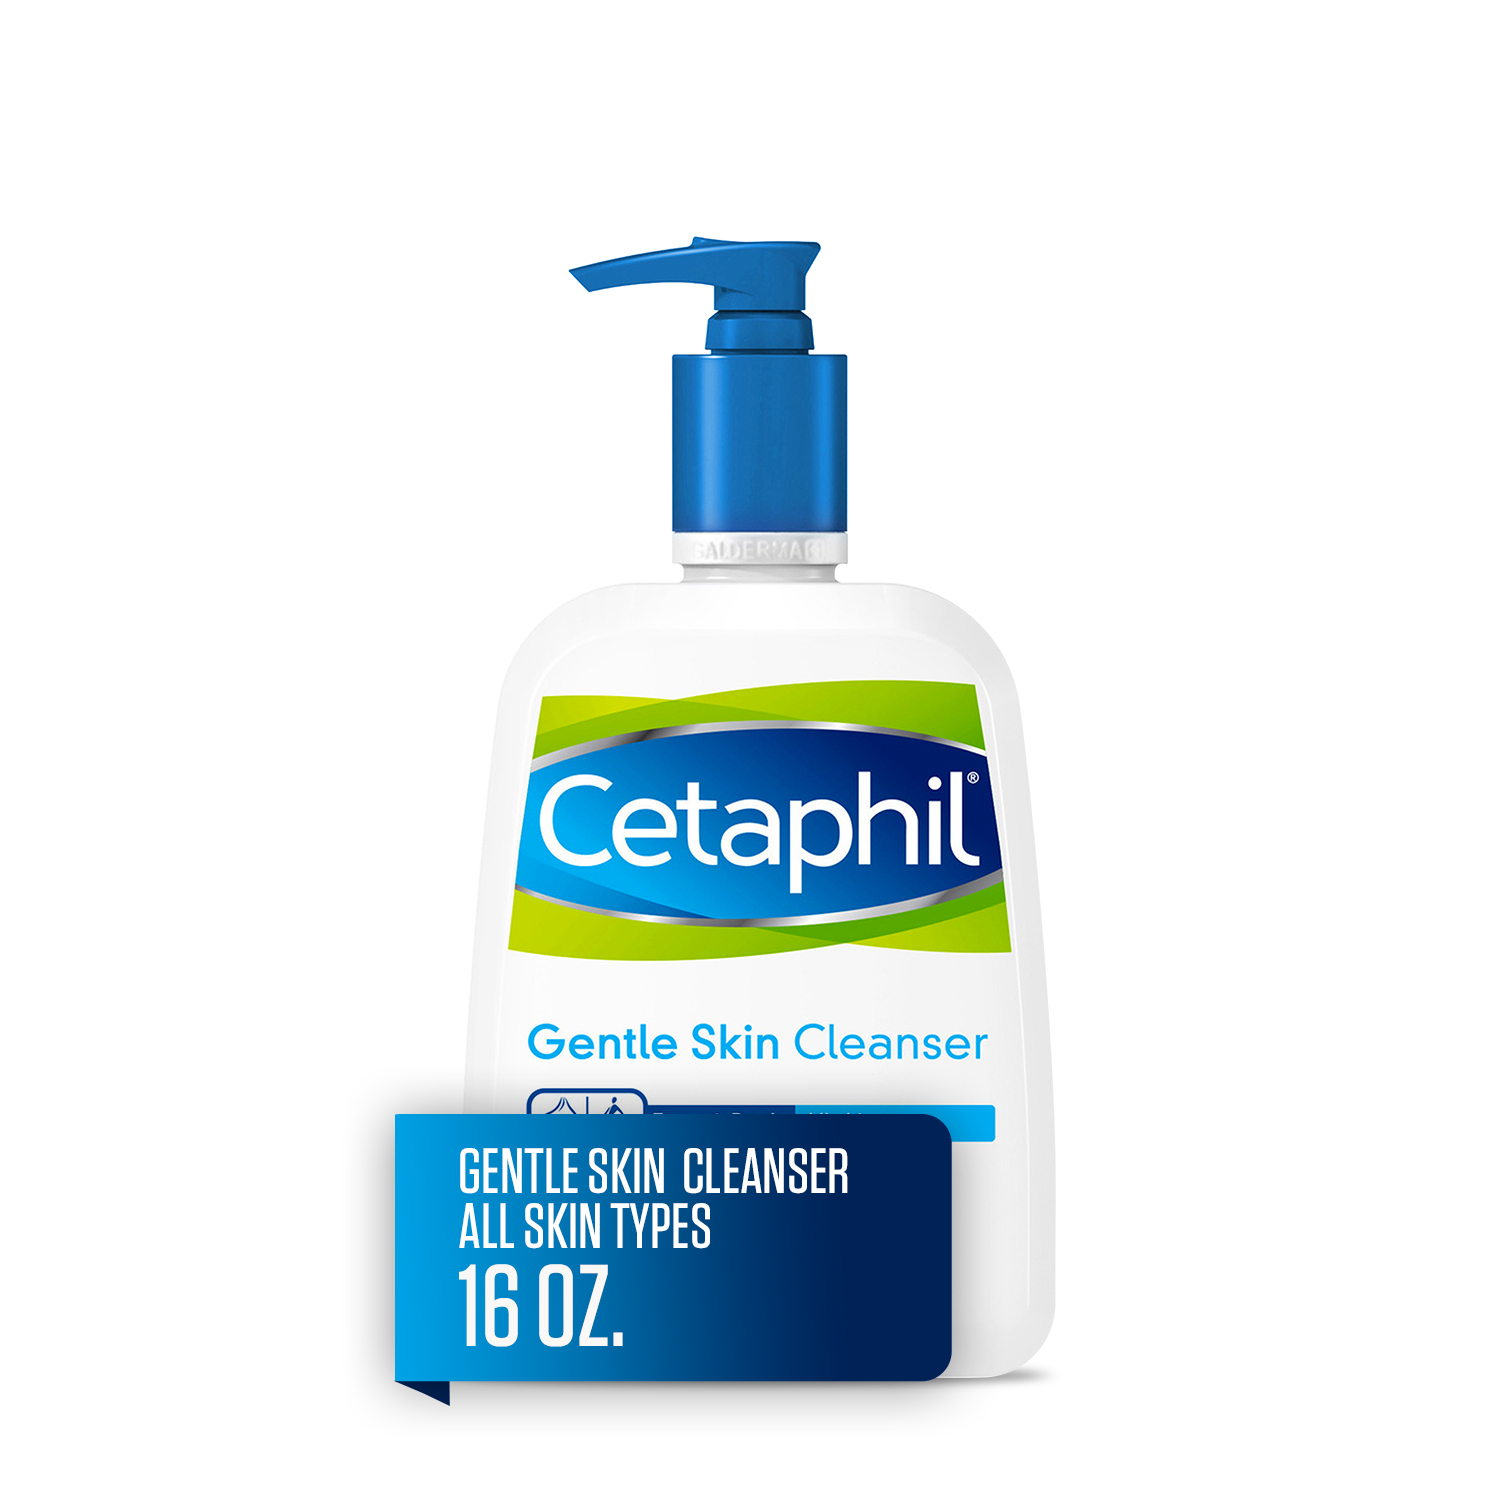 Cetaphil Gentle Skin Cleanser, Hydrating Face Wash & Body Wash, Ideal for Sensitive, Dry Skin, Fragrance-Free, Dermatologist Recommended, 16 fl oz - image 1 of 9